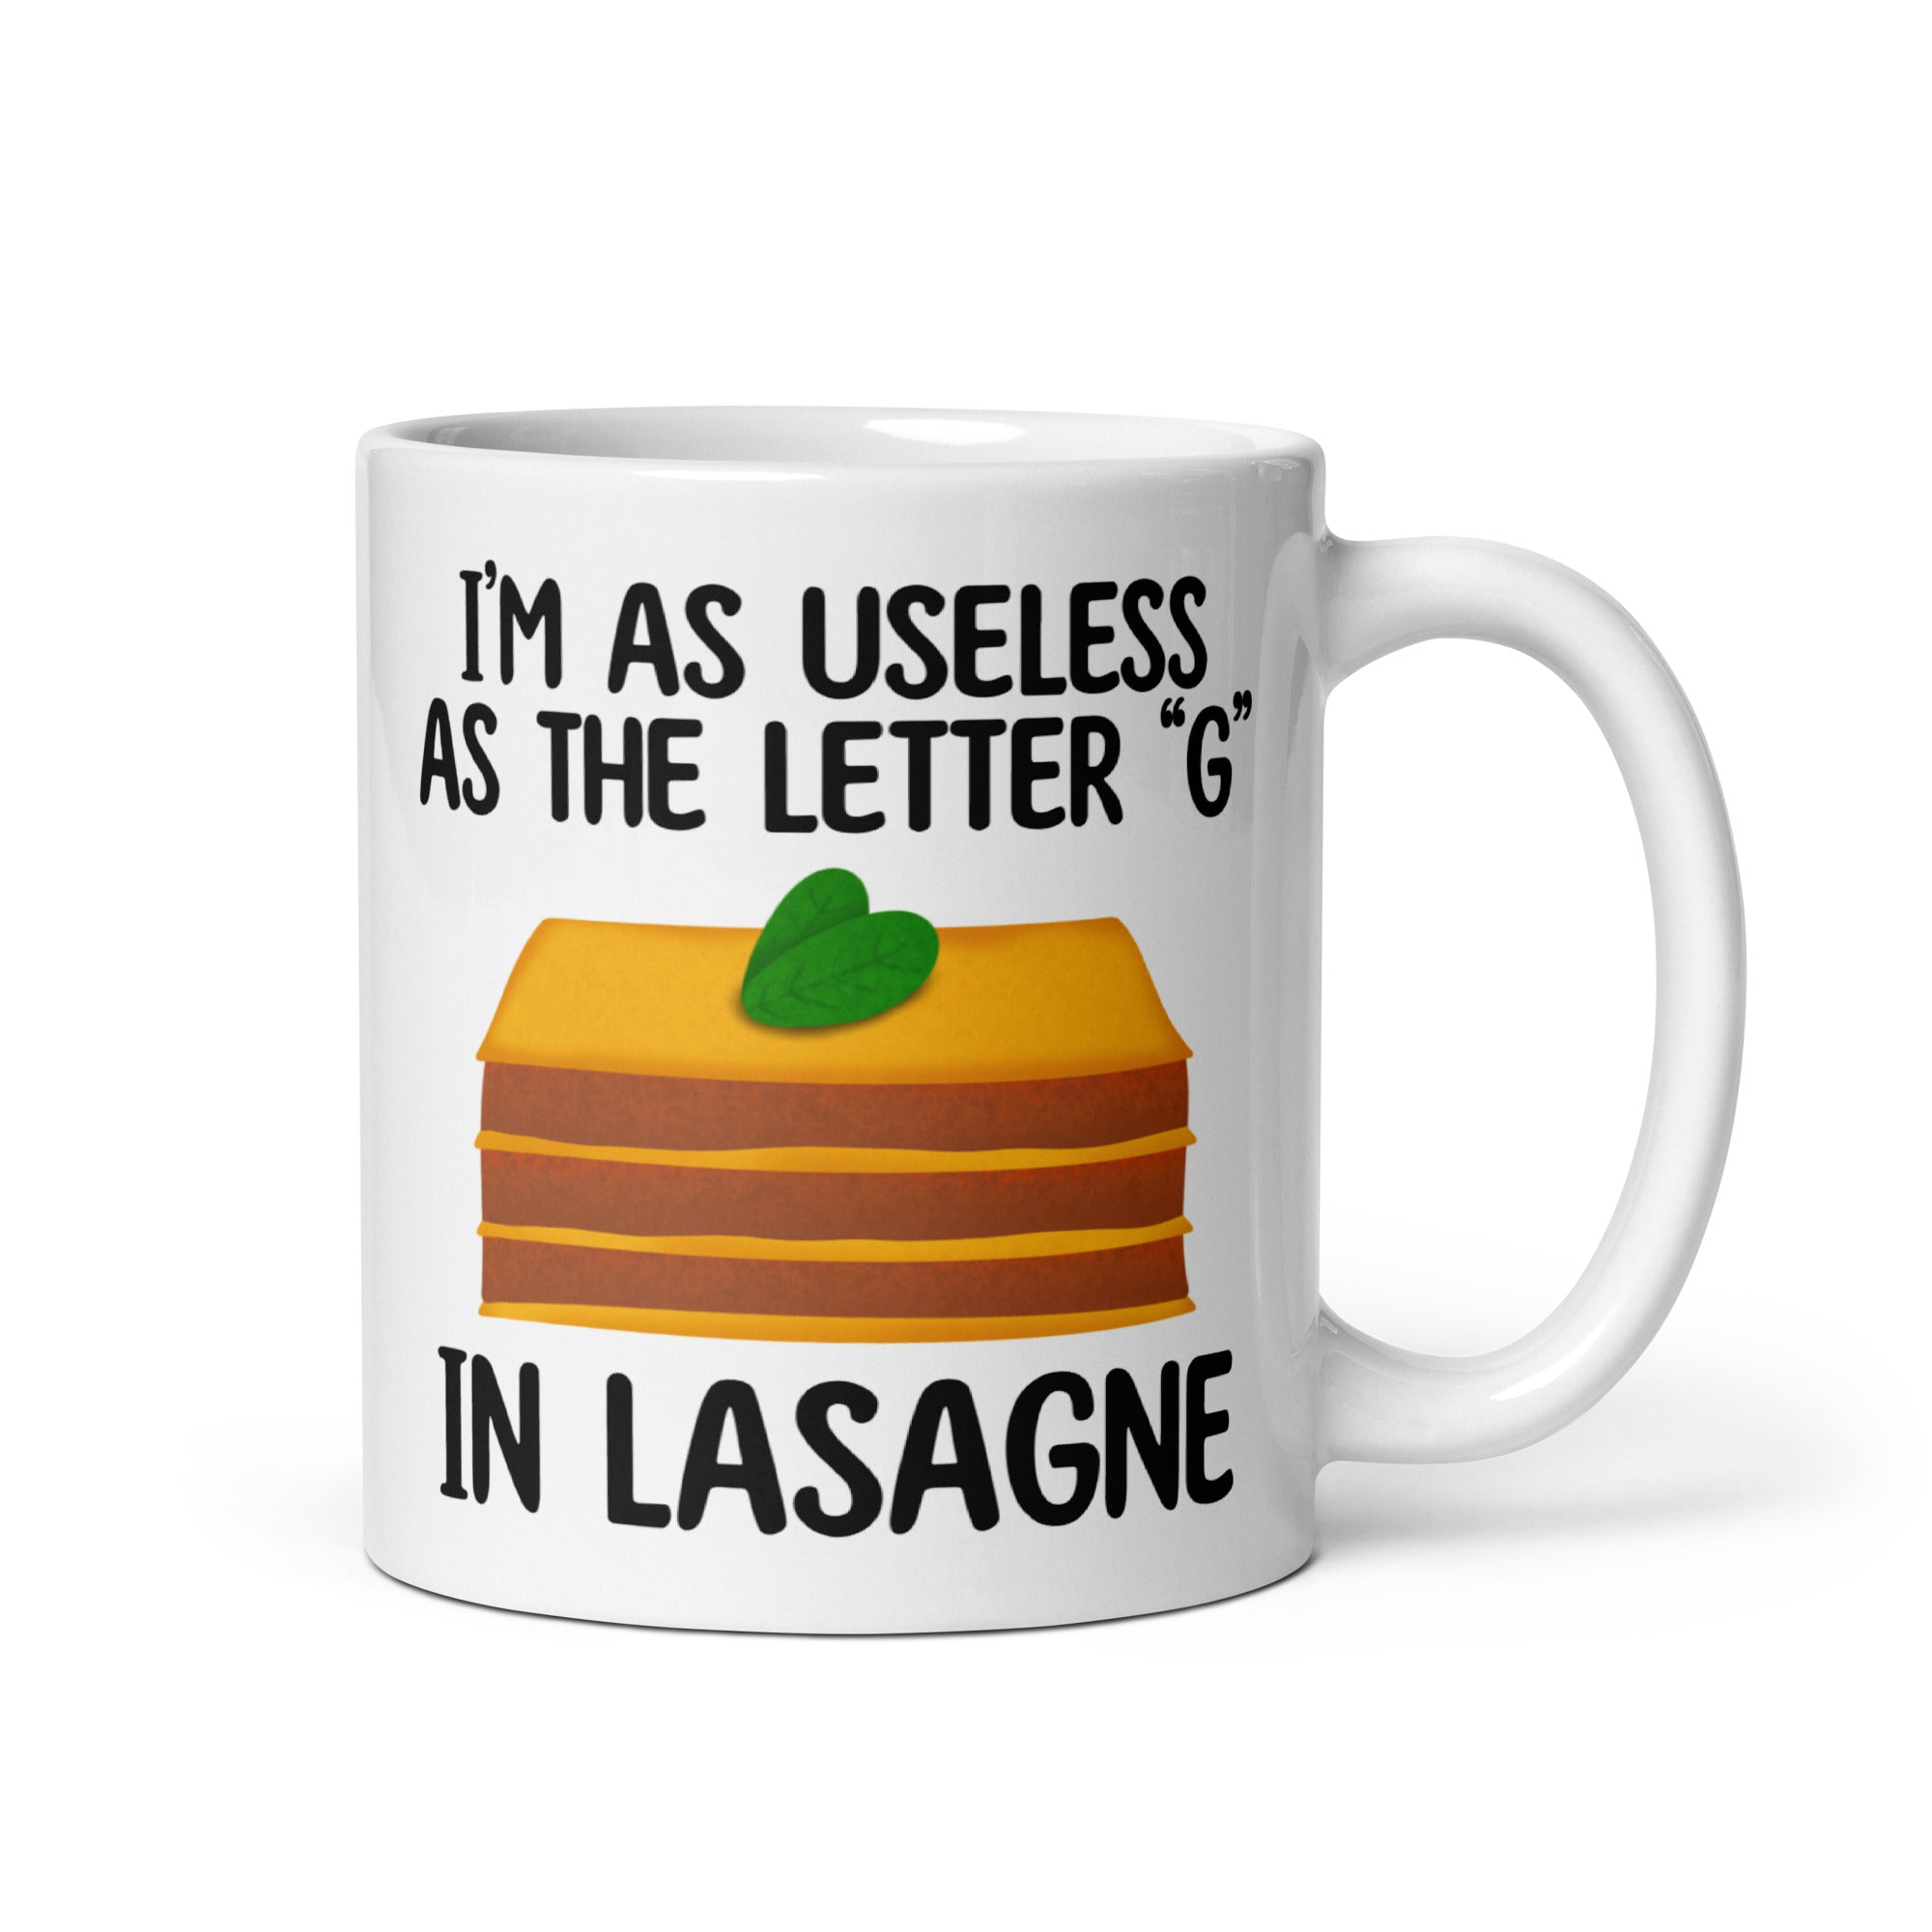 im-as-useless-as-the-letter-g-in-lasagne-mug